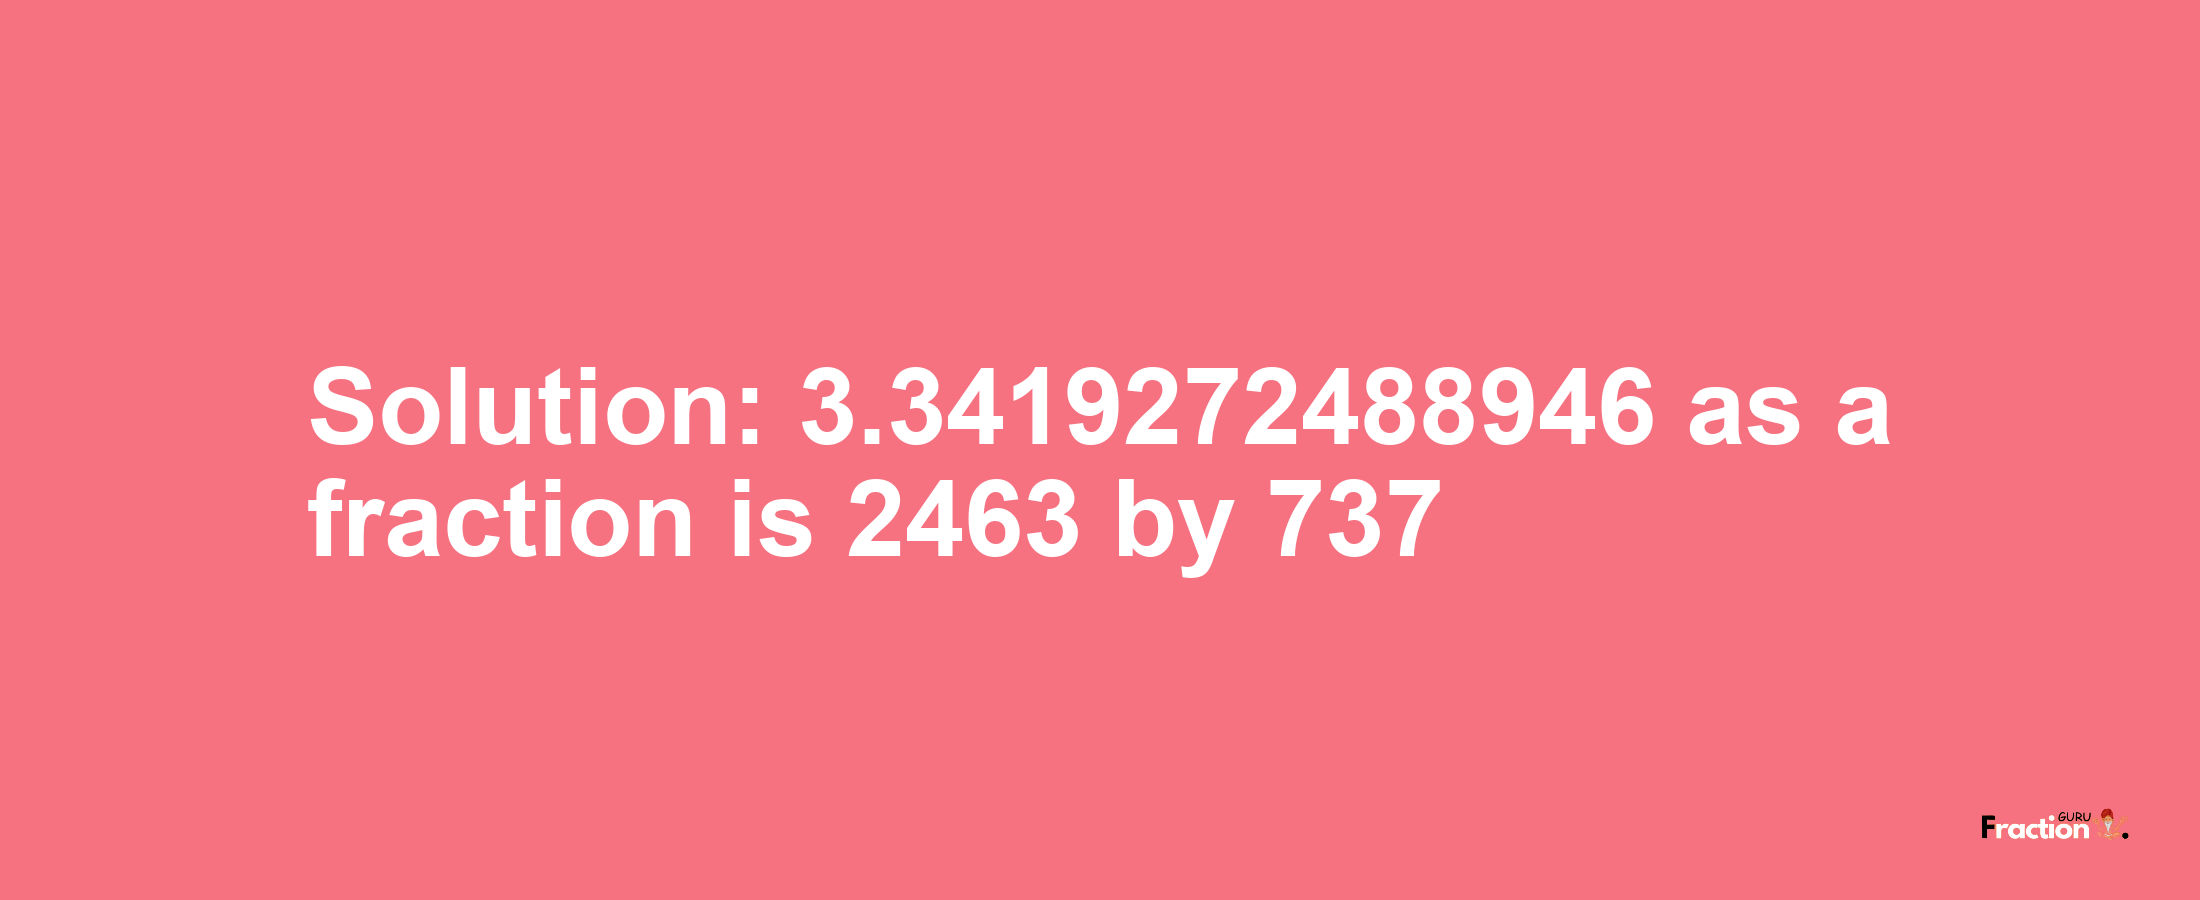 Solution:3.3419272488946 as a fraction is 2463/737